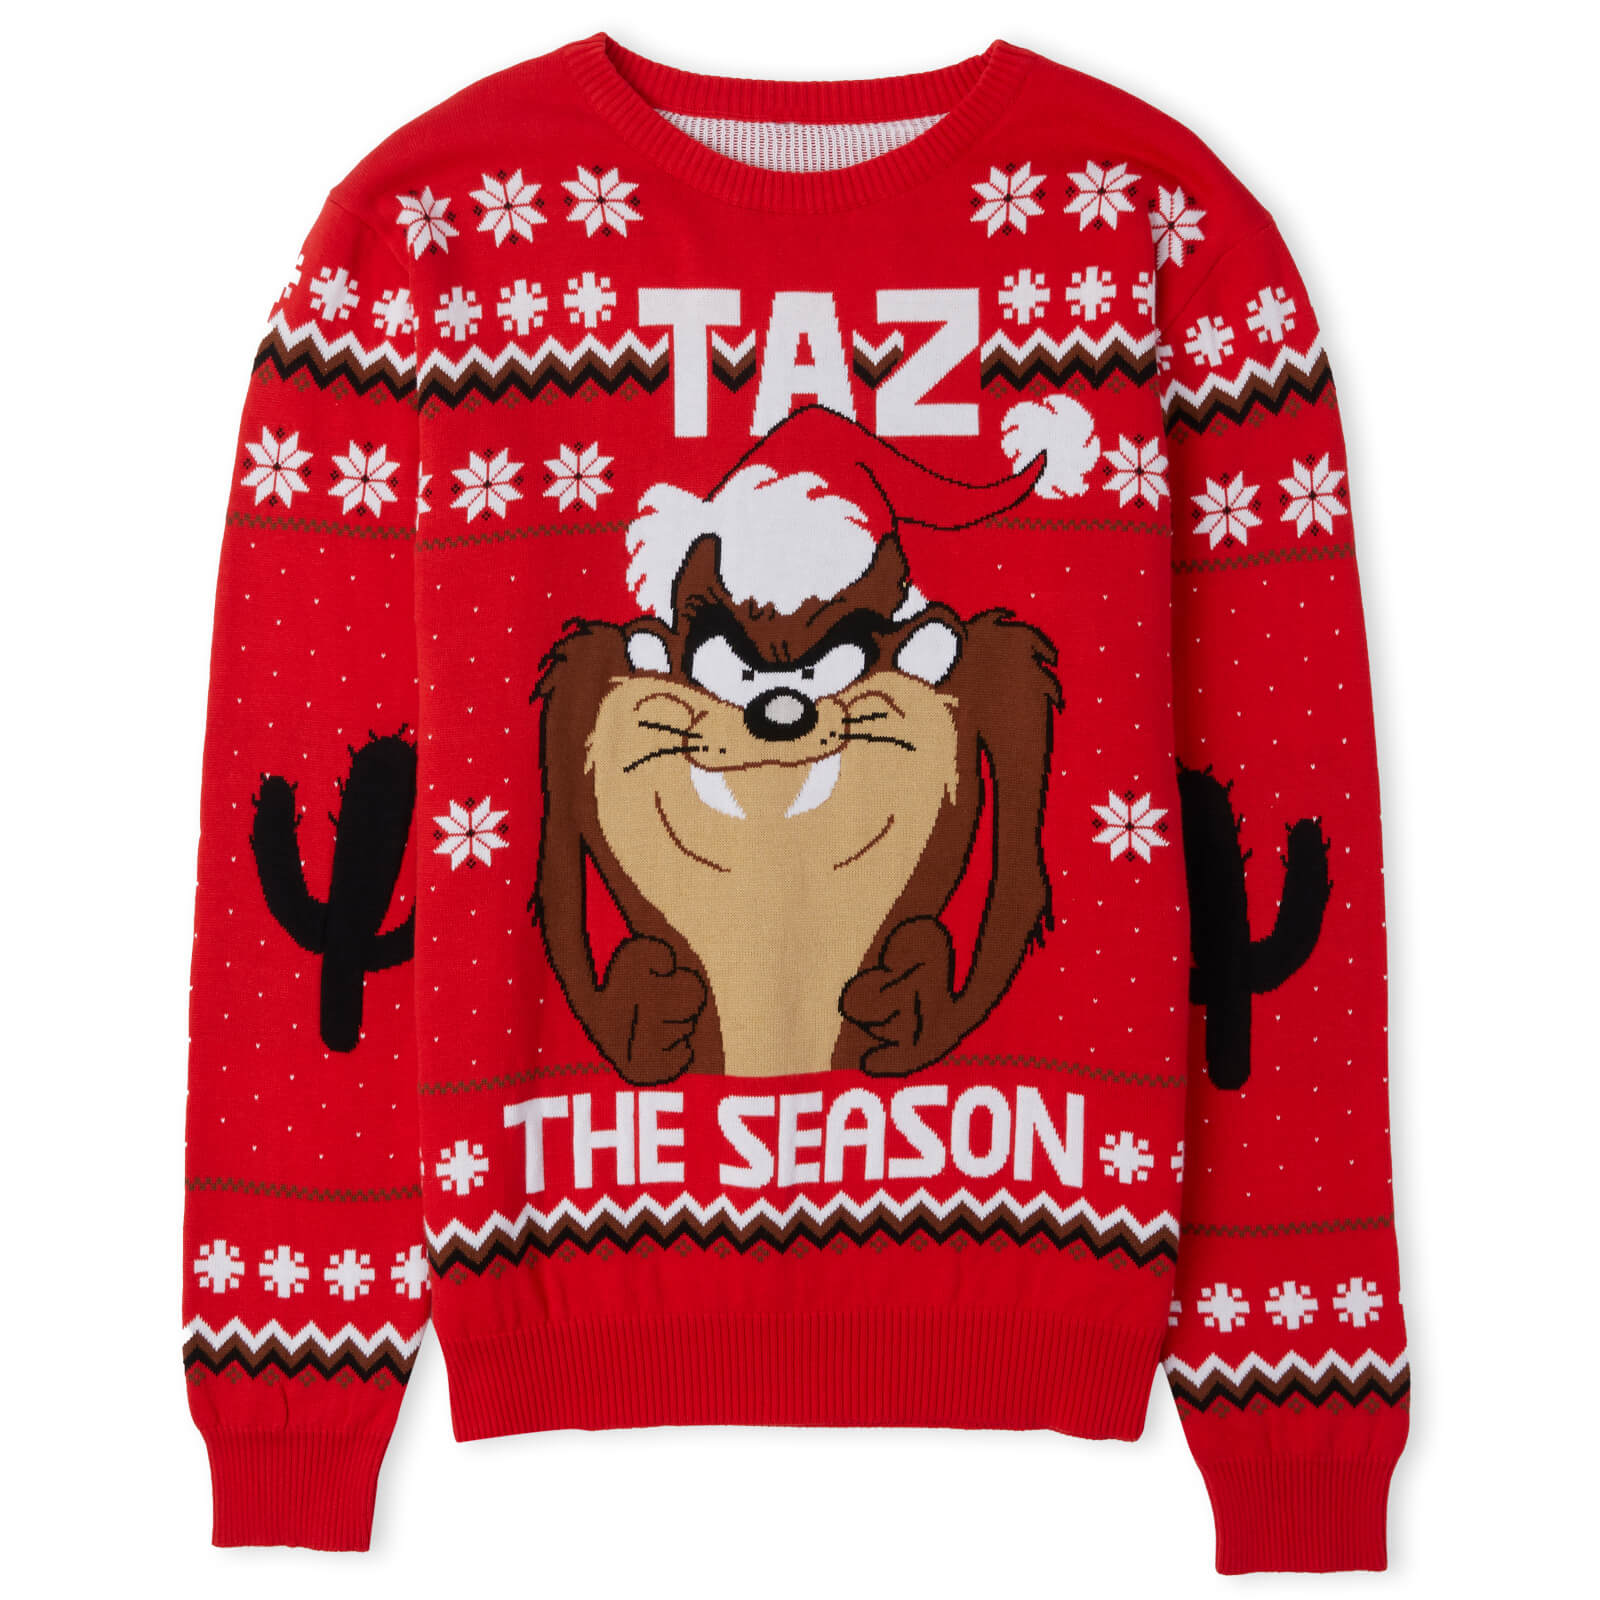 Taz the Season Christmas Knitted Jumper Red - L